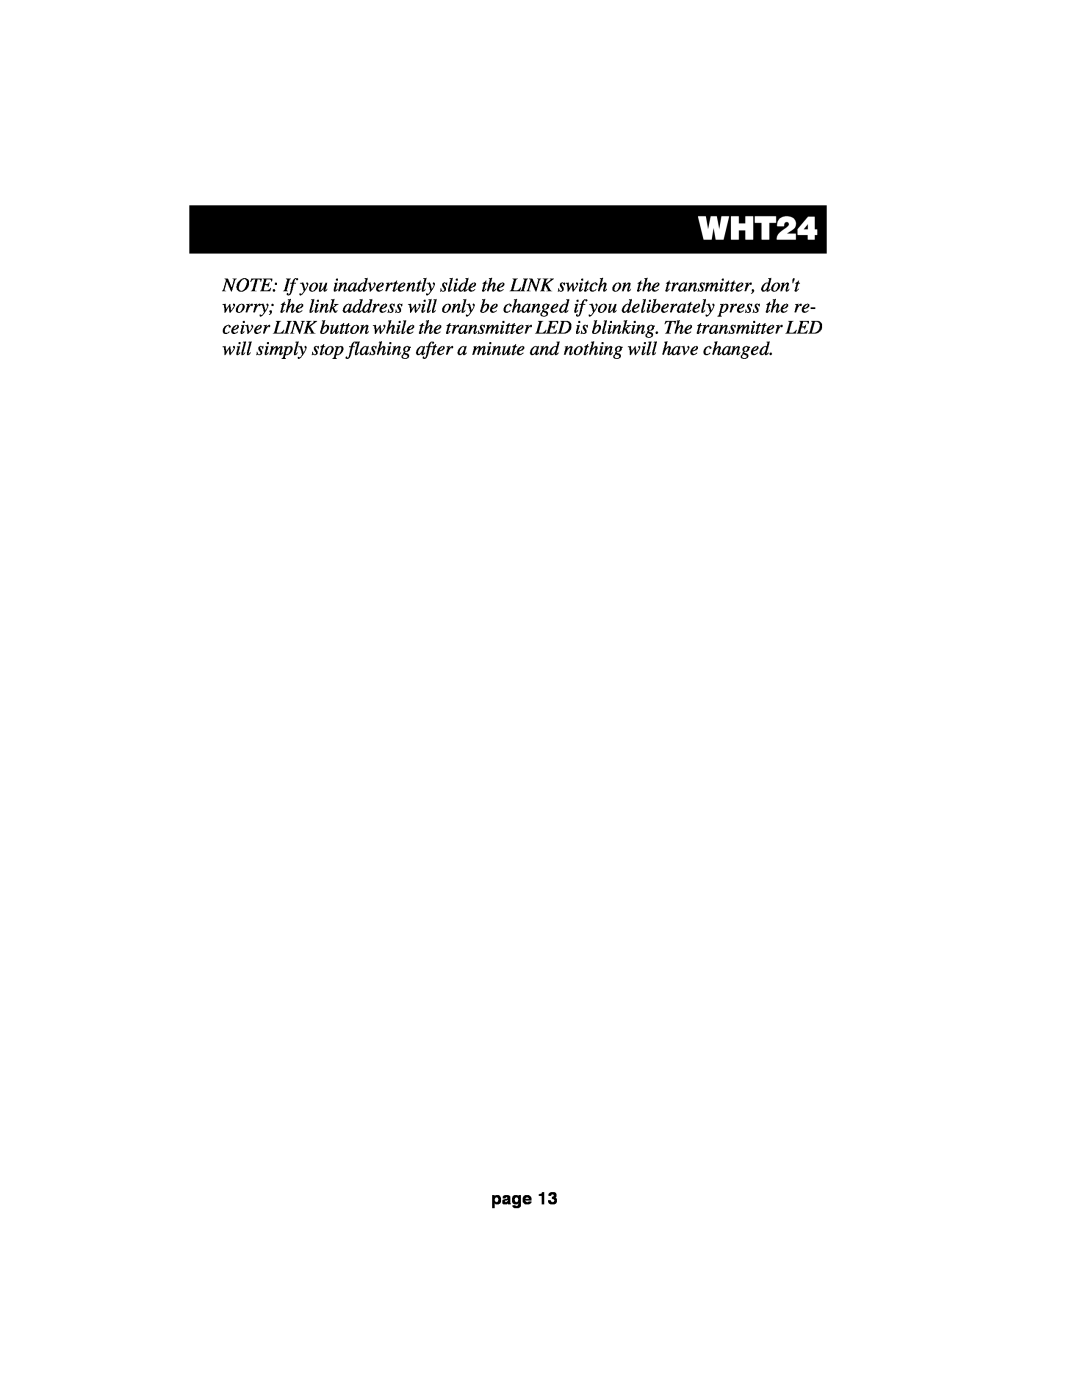 Acoustic Research HT60 operation manual WHT24, page 